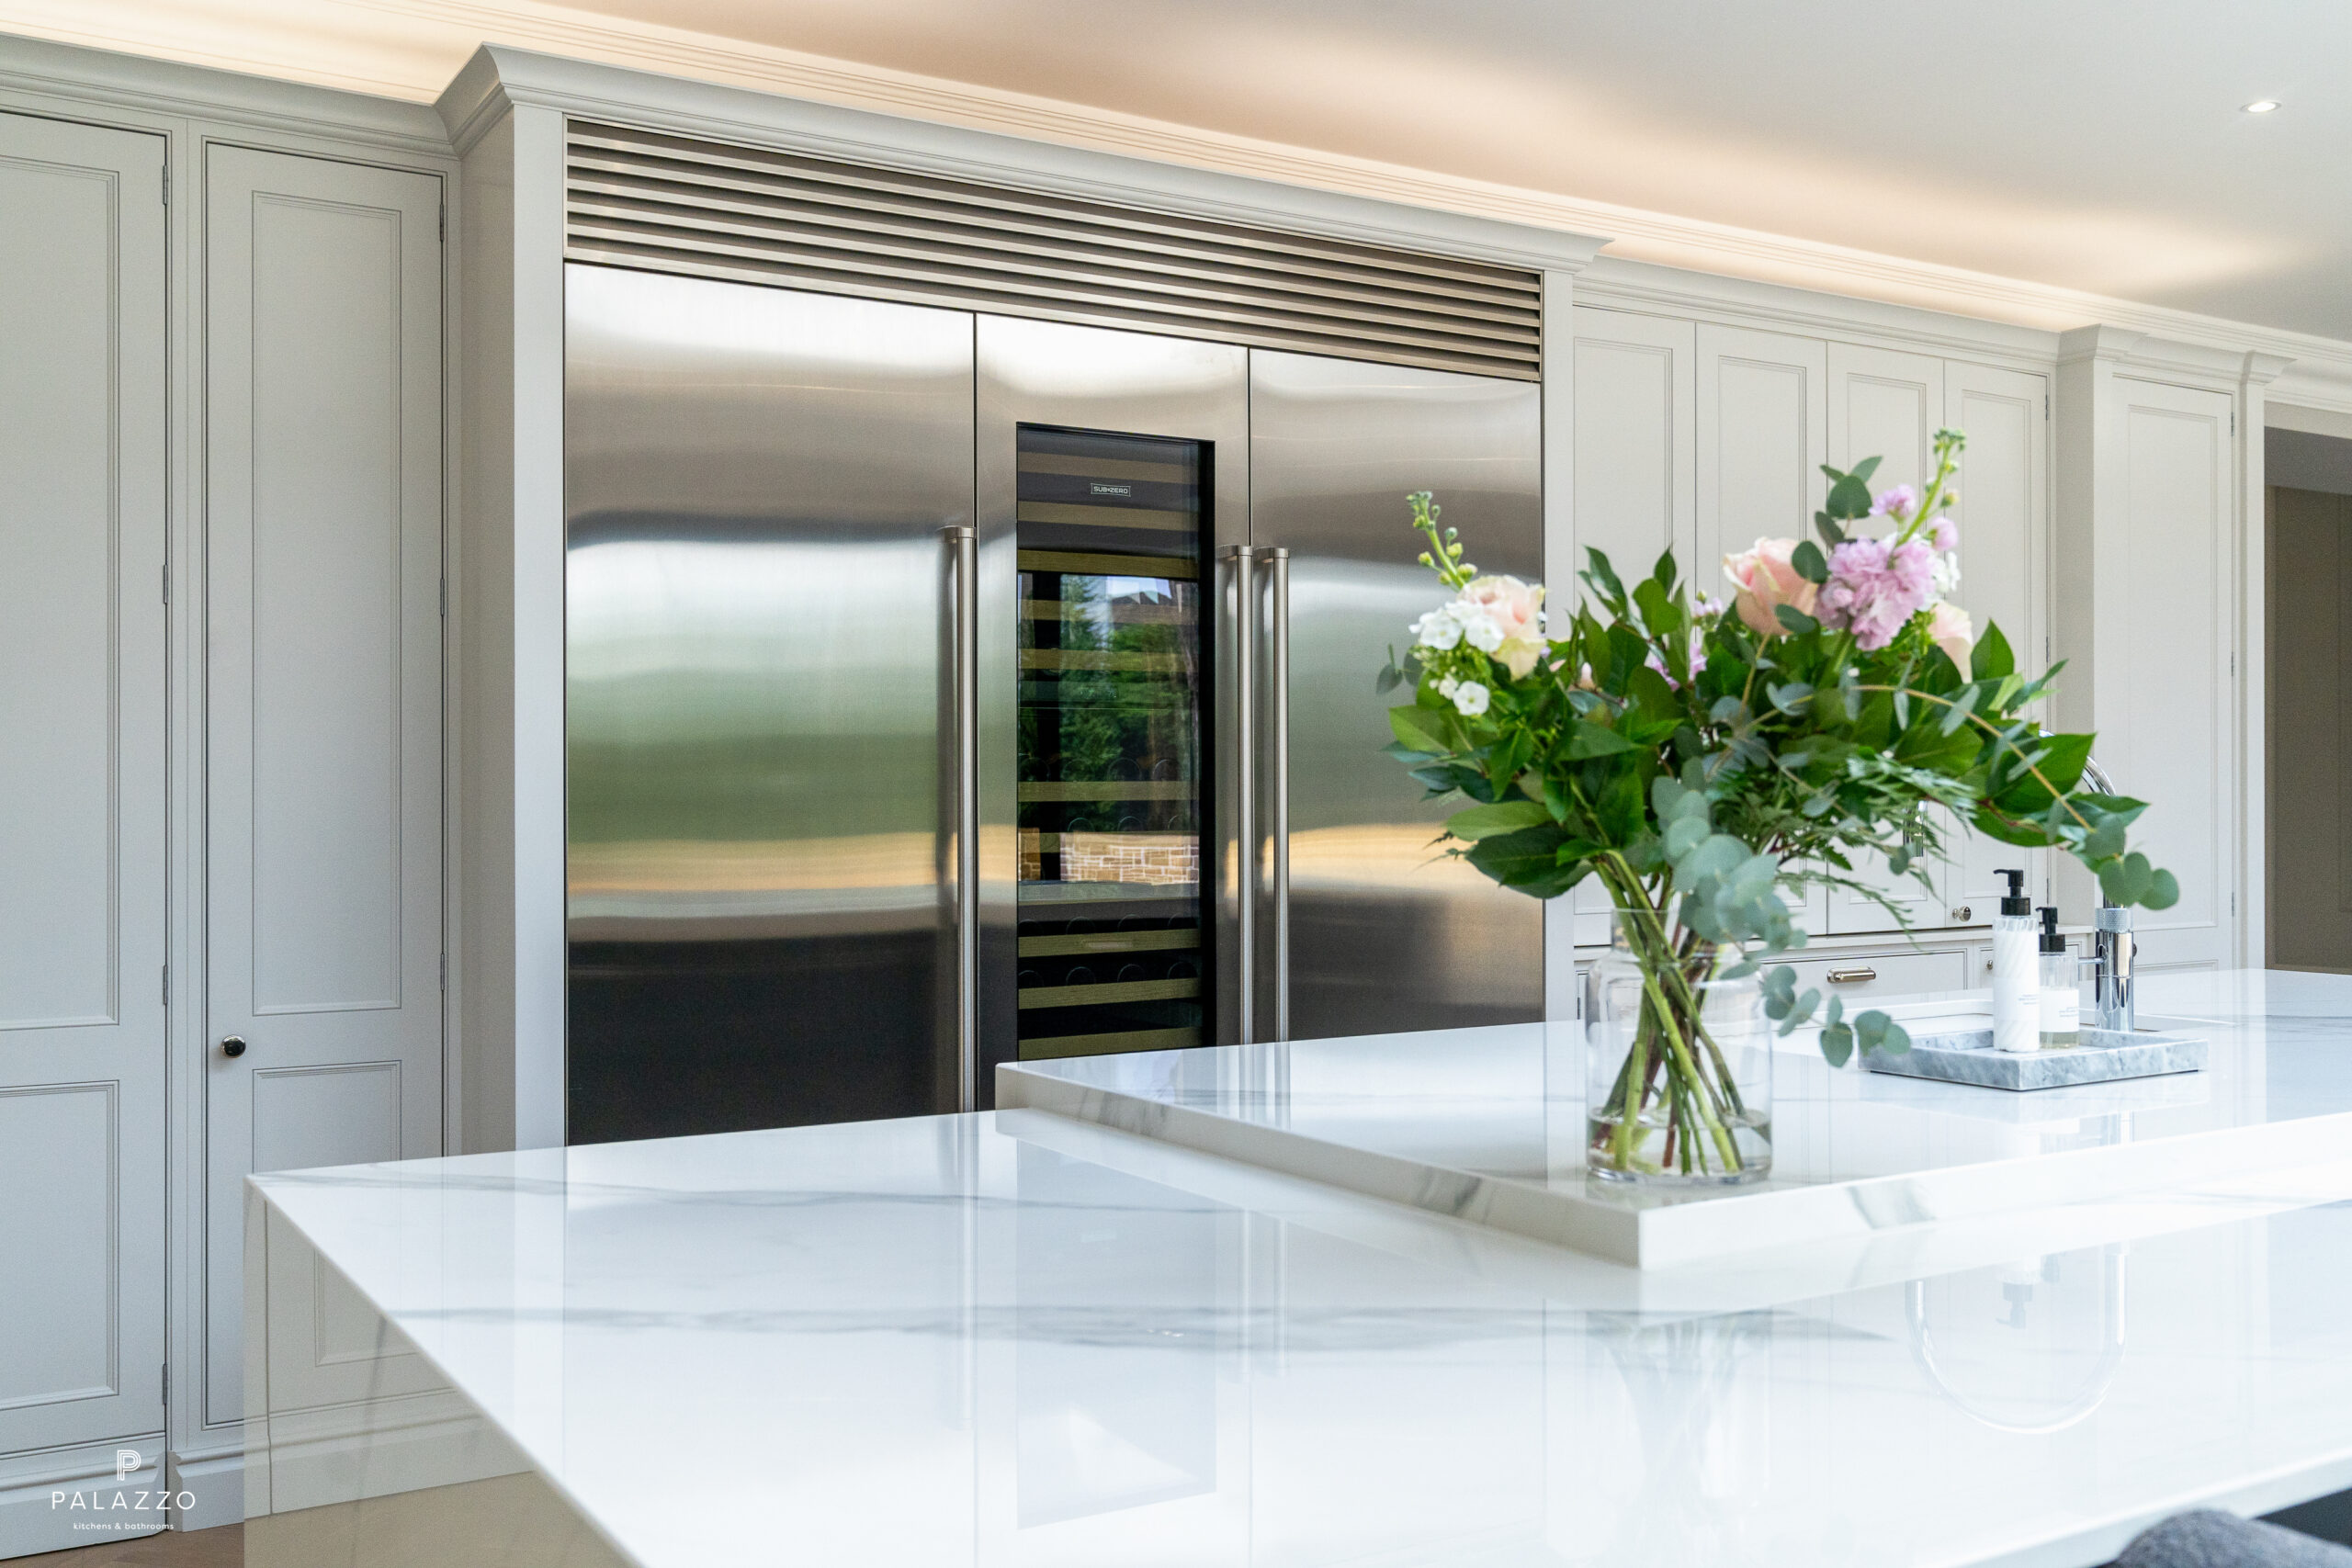 Image 9: An In-Frame Kitchen In A New Home Extension In Glasgow